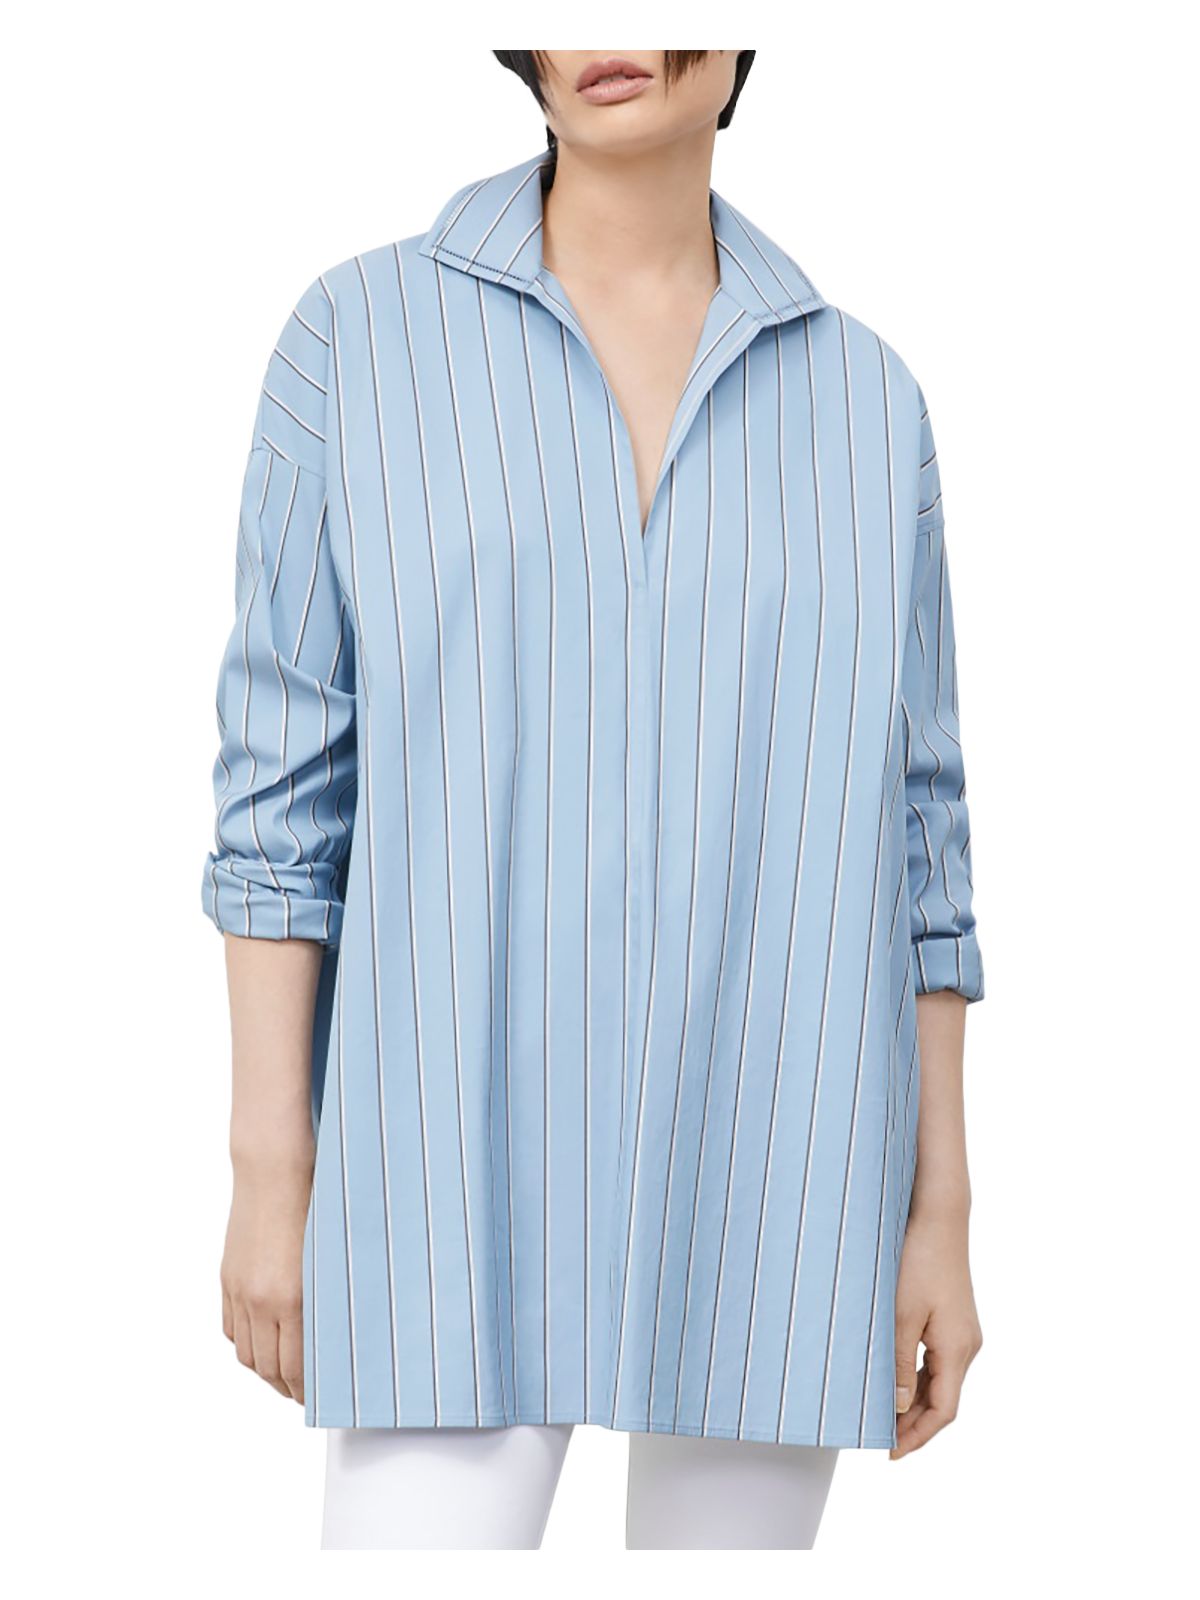 LAFAYETTE 148 Womens Blue Striped Long Sleeve Collared Tunic Top S